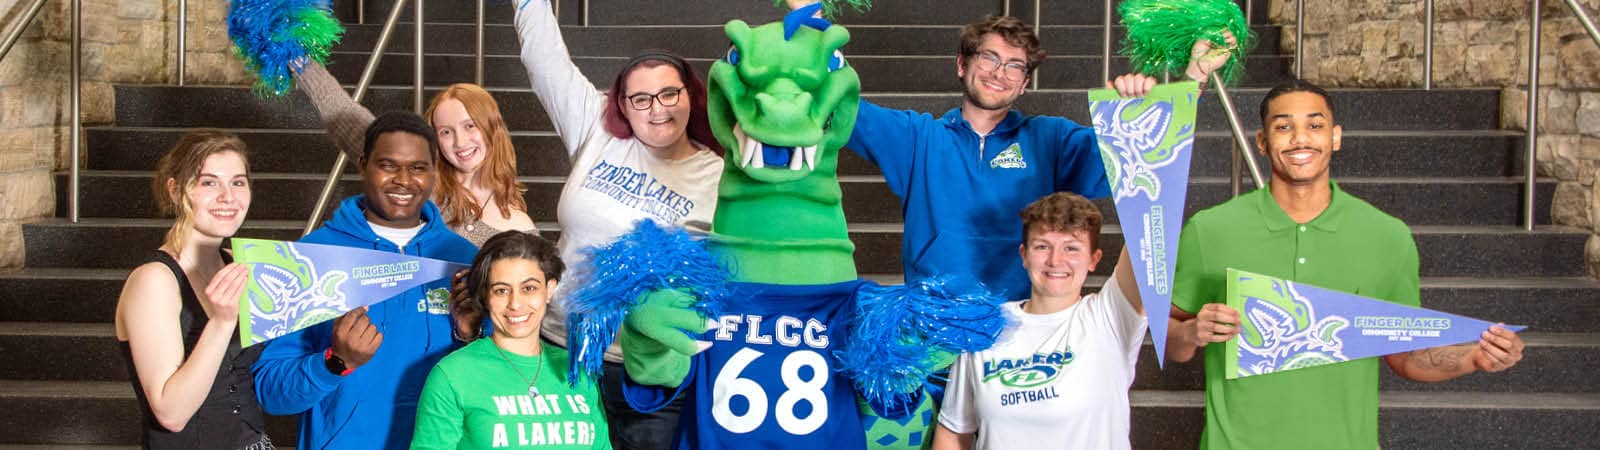 Students and the FLCC mascot Flick show off their school spirit with Laker pennants and pompoms.